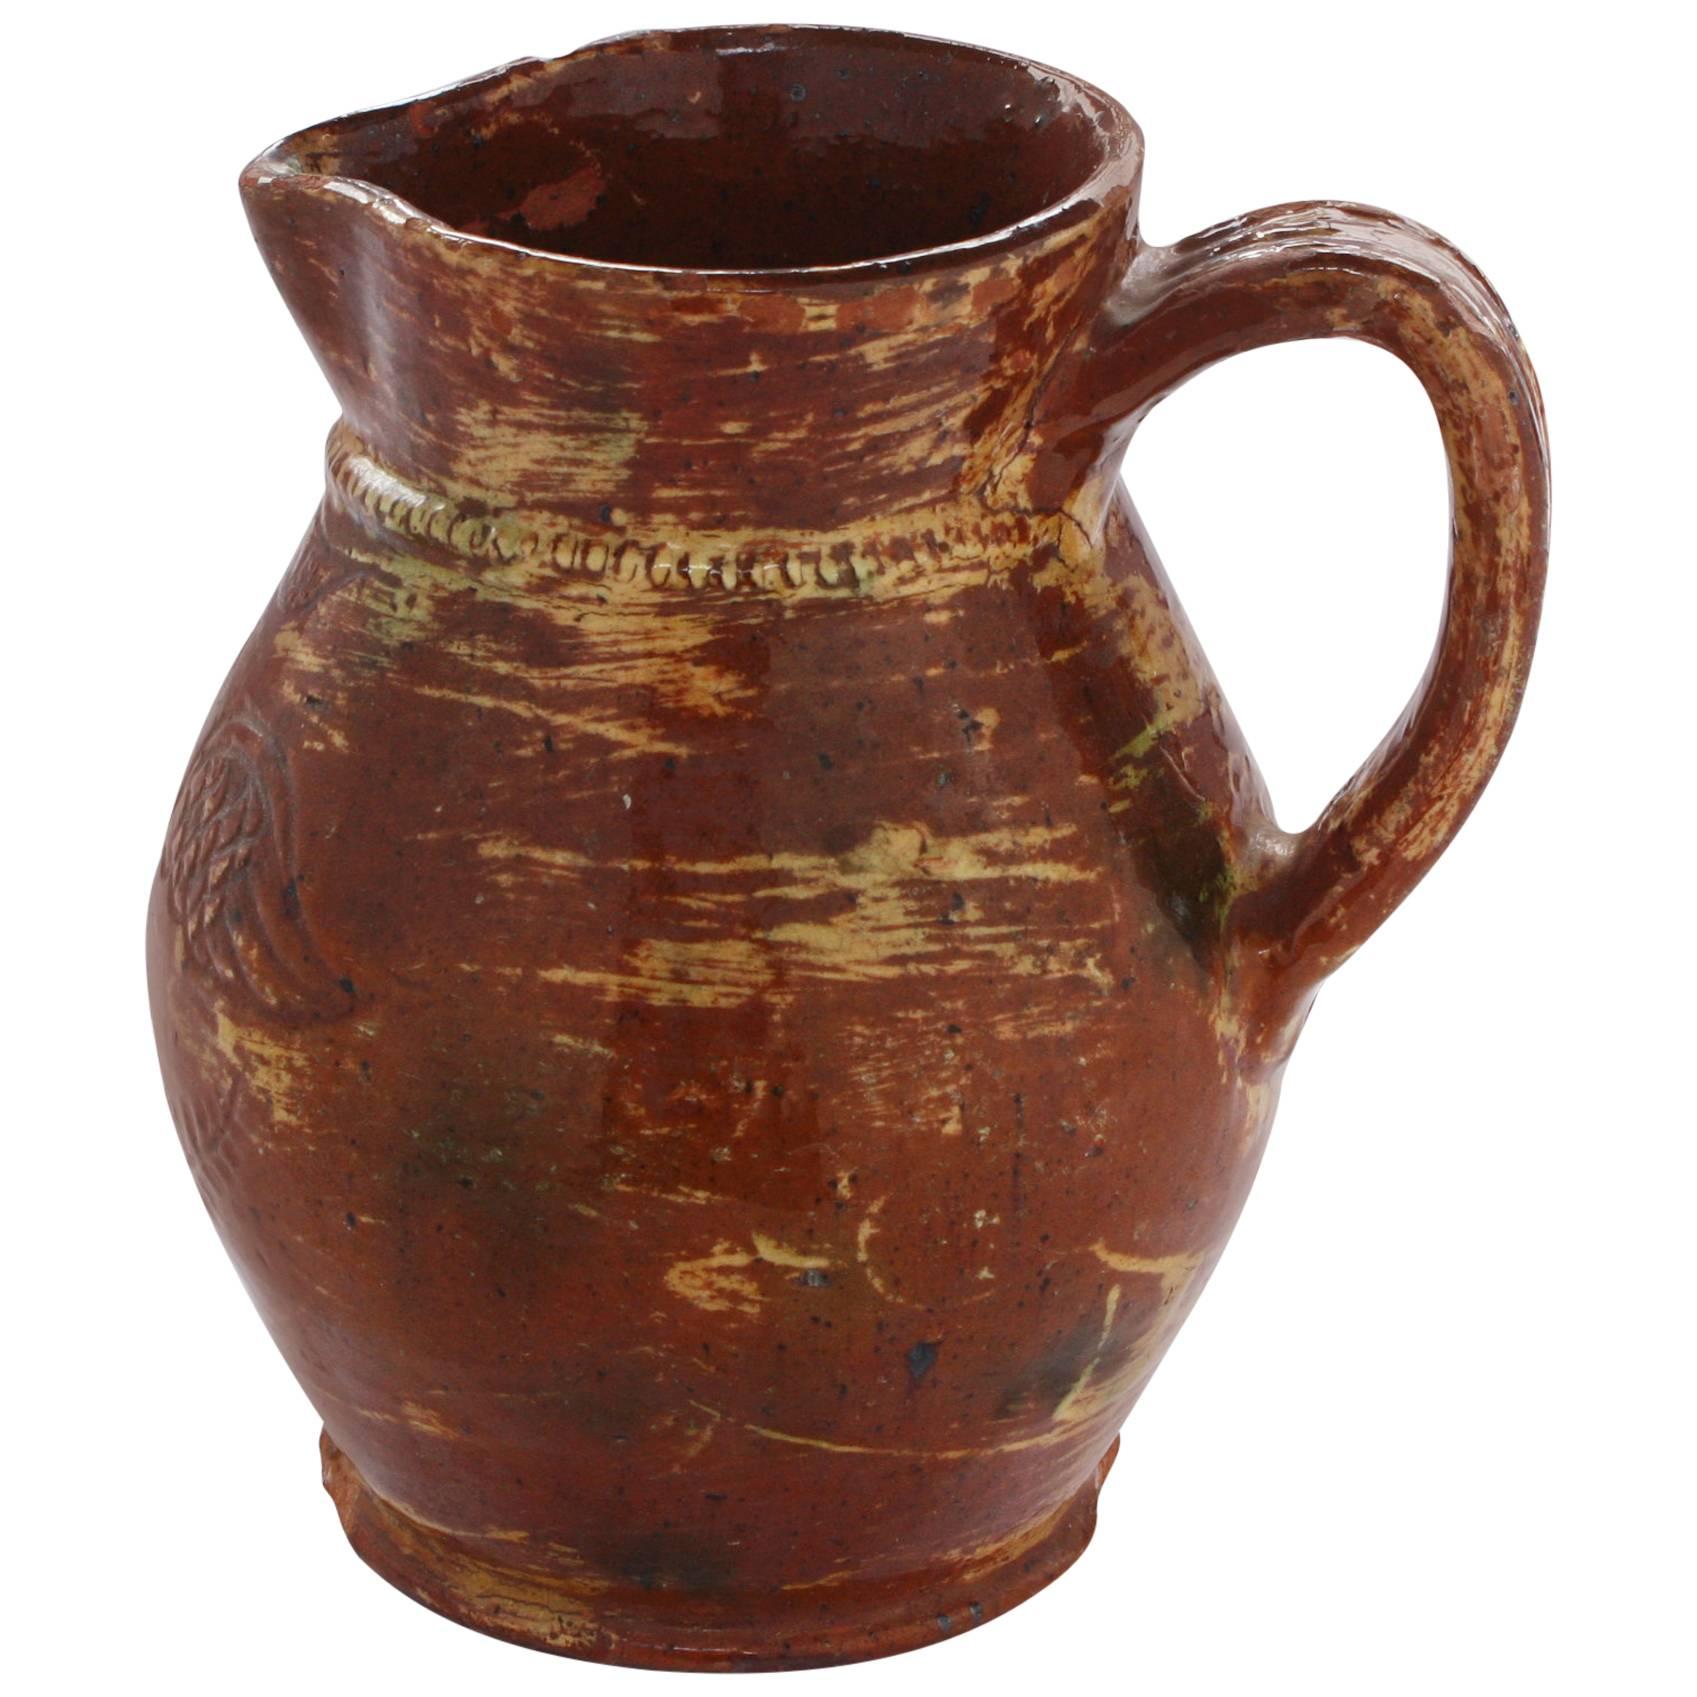 Glazed Redware Pitcher with Incised Federal Eagle Attributed to Jacob Medinger